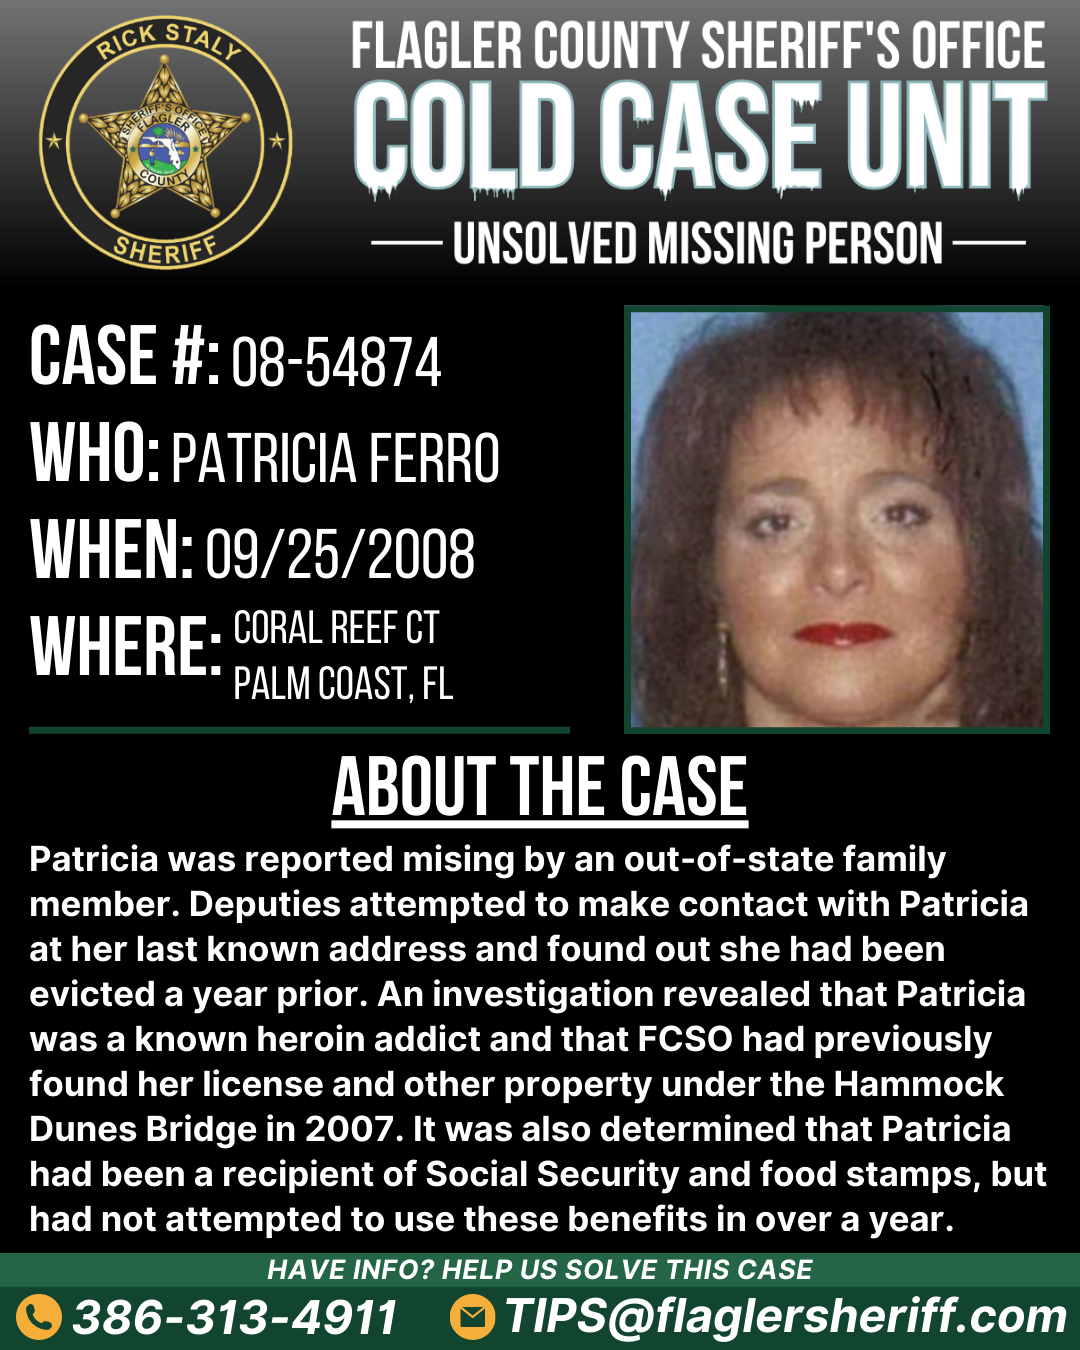 Case #08-54874. Missing Person. Who: Patricia Ferro. When: 09/25/2008. Where: Coral Reef Court (Palm Coast, FL). About the case: Patricia was reported mising by an out-of-state family member. Deputies attempted to make contact with Patricia at her last known address and found out she had been evicted a year prior. An investigation revealed that Patricia was a known heroin addict and that FCSO had previously found her license and other property under the Hammock Dunes Bridge in 2007. It was also determined that Patricia had been a recipient of Social Security and food stamps, but had not attempted to use these benefits in over a year.